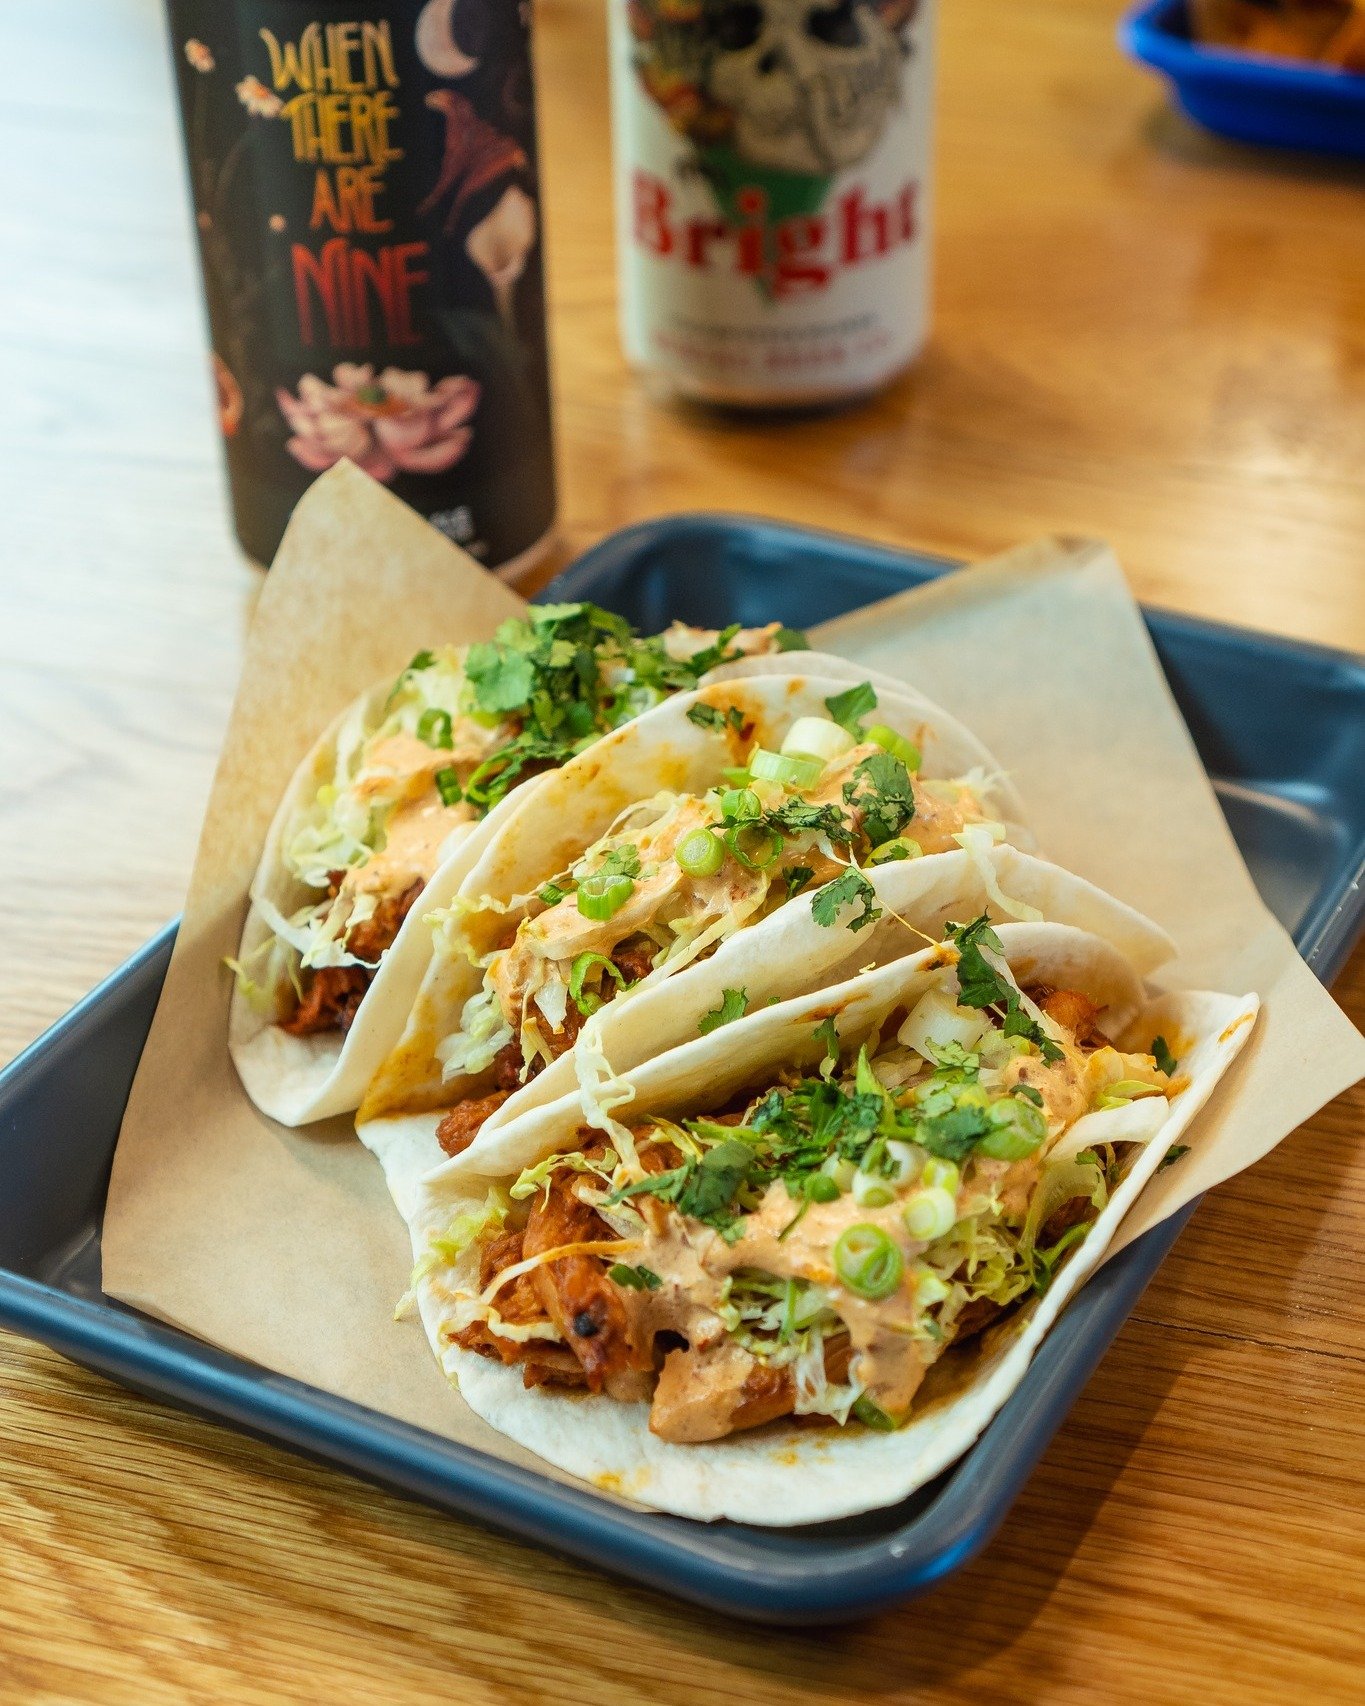 Have you tried our Tacos? 🌮 Choose your protein (vegan optional) and enjoy our flour tortillas topped with peppers &amp; onions, shredded lettuce, and chipotle crema.

Don't forget to hit the link in our bio to join our Loyalty Program. Next time yo